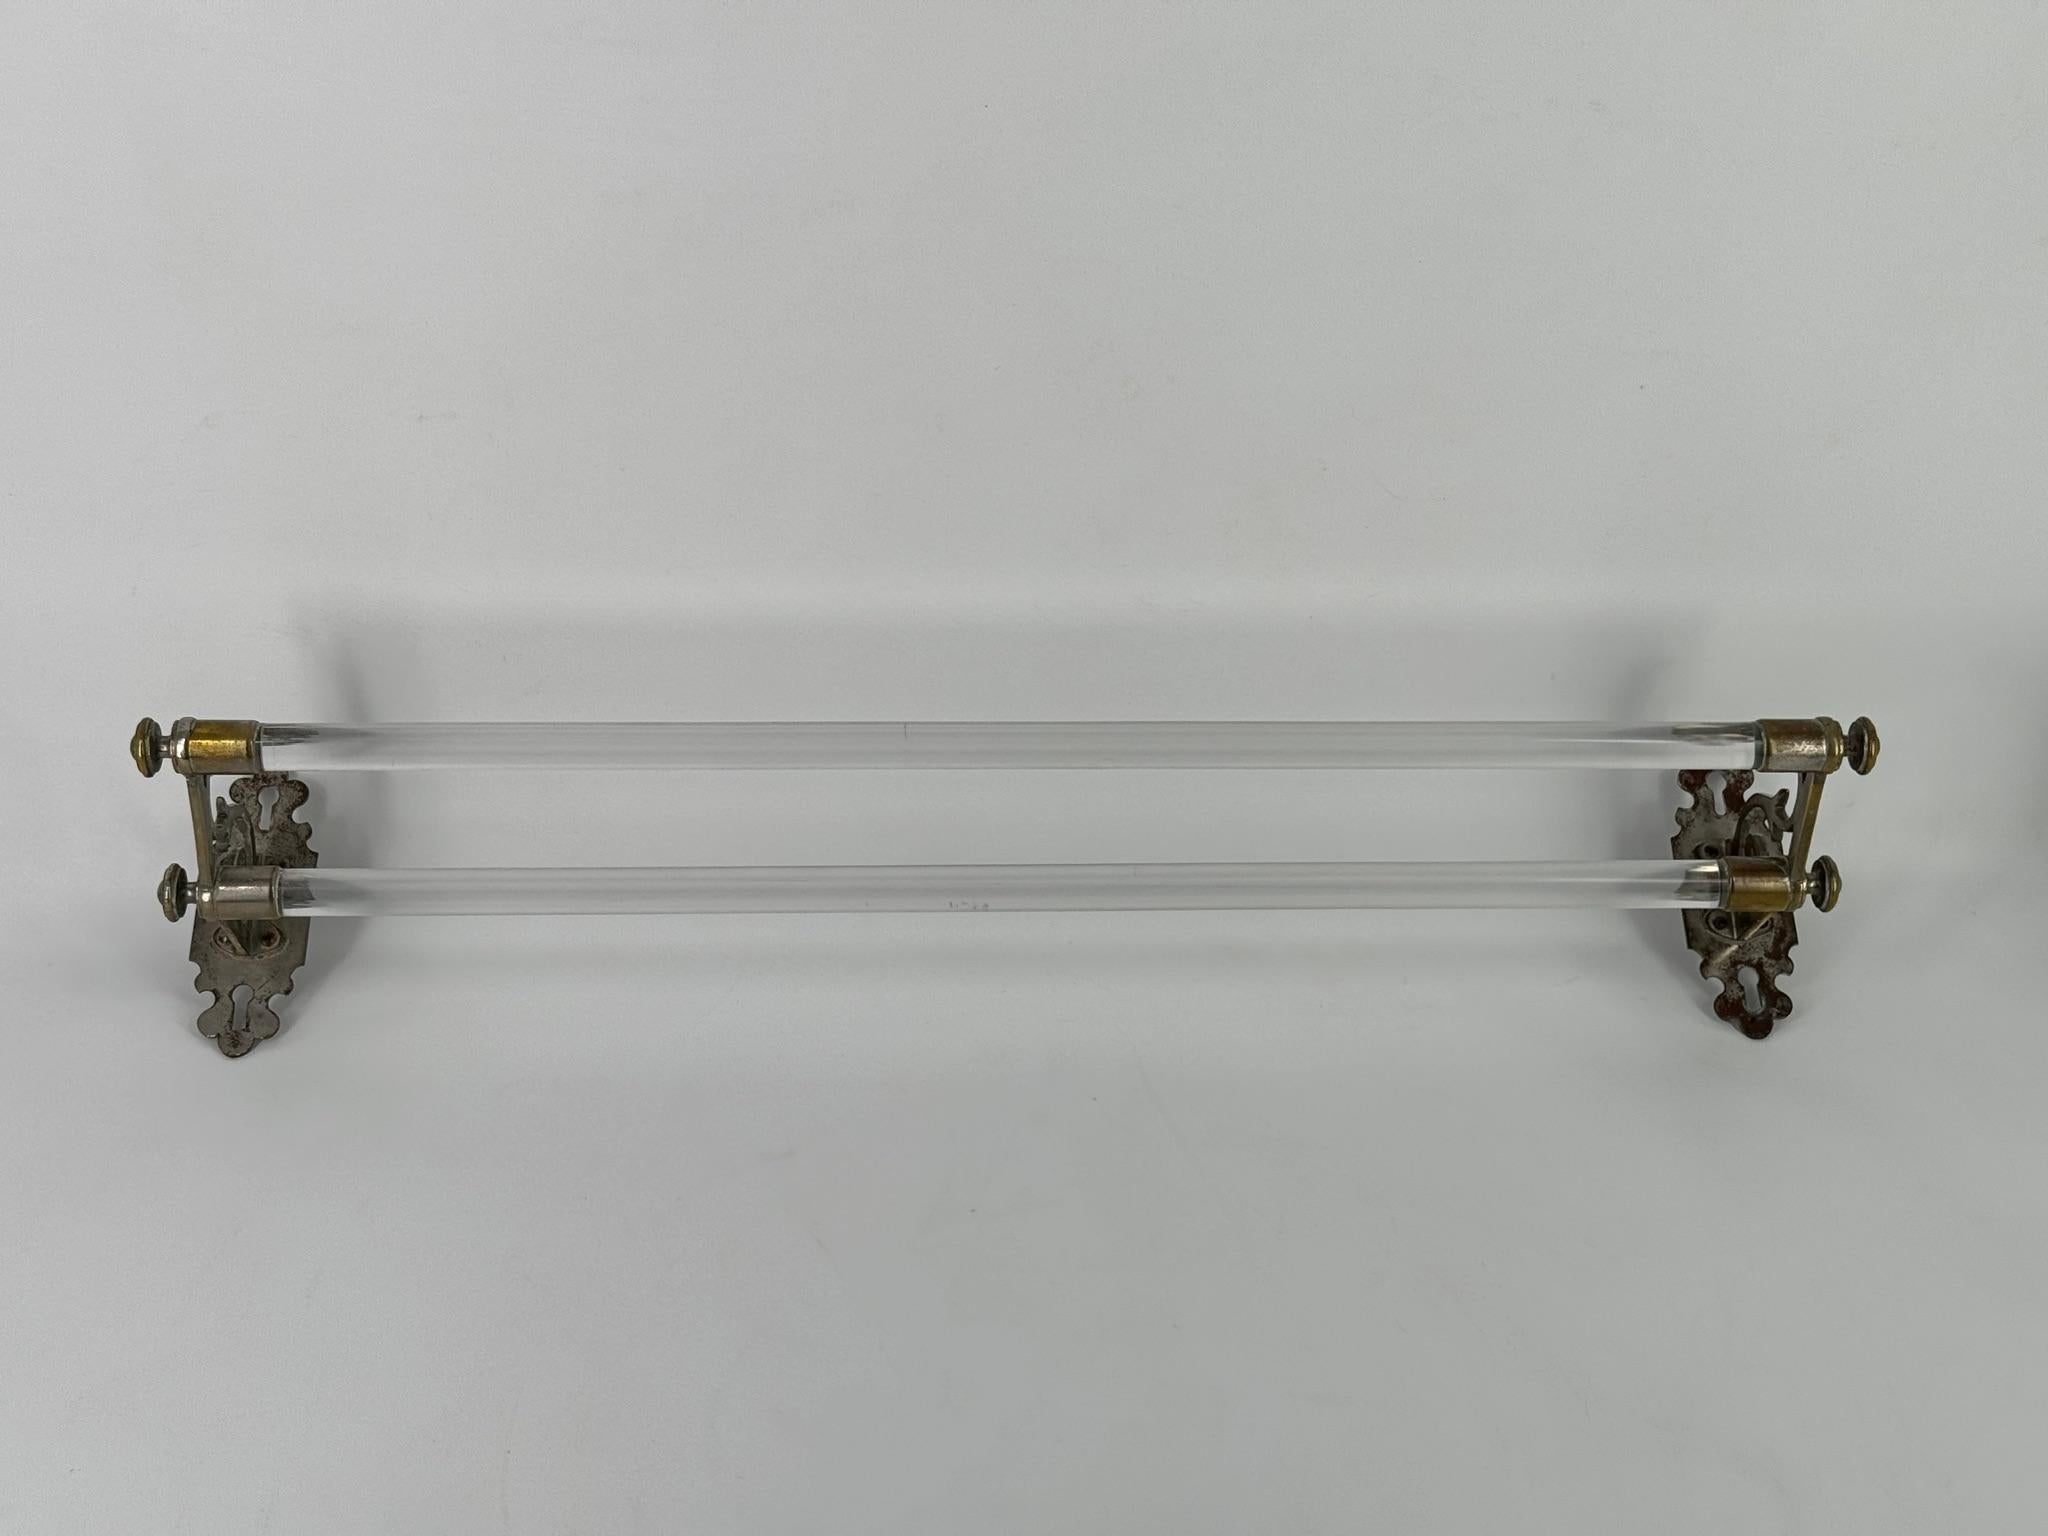 Antique French Glass and Nickelled brass Double Towel Rail 1900 Art Nouveau For Sale 2